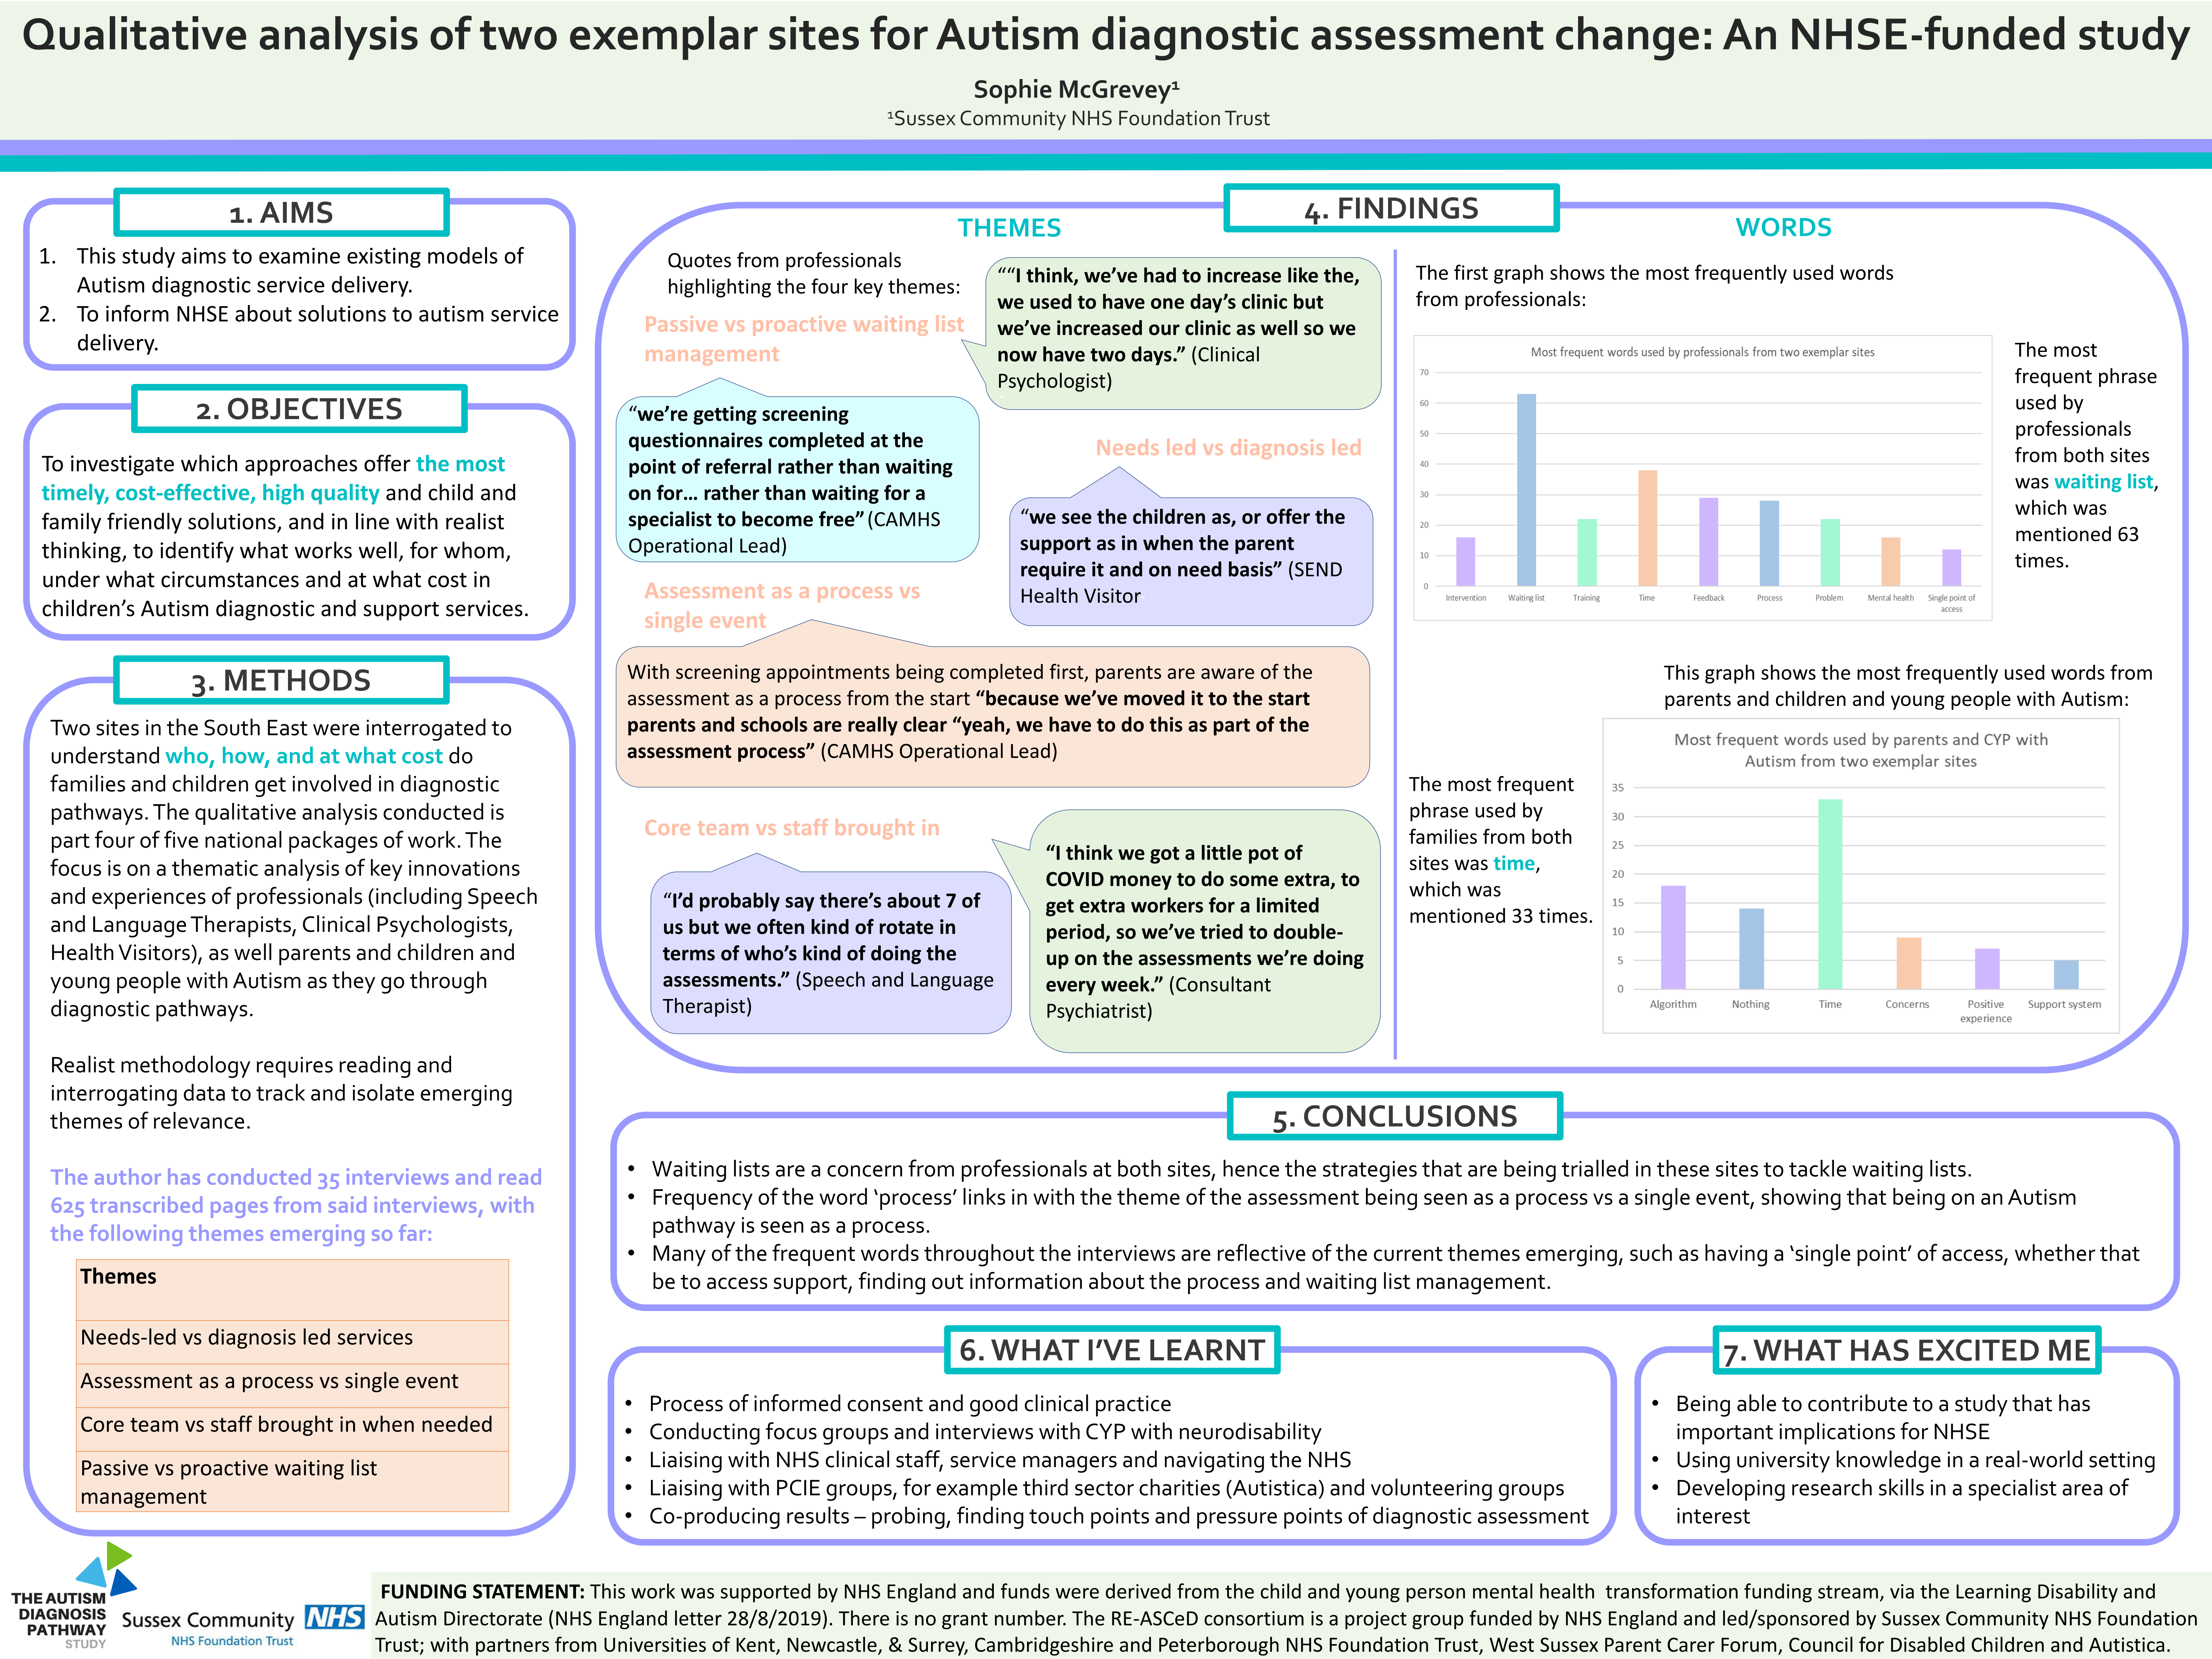 Qualitative analysis of two exemplar sites for Autism diagnostic assessment change: An NHSE-funded study - Sophie McGrevey Thumbnail